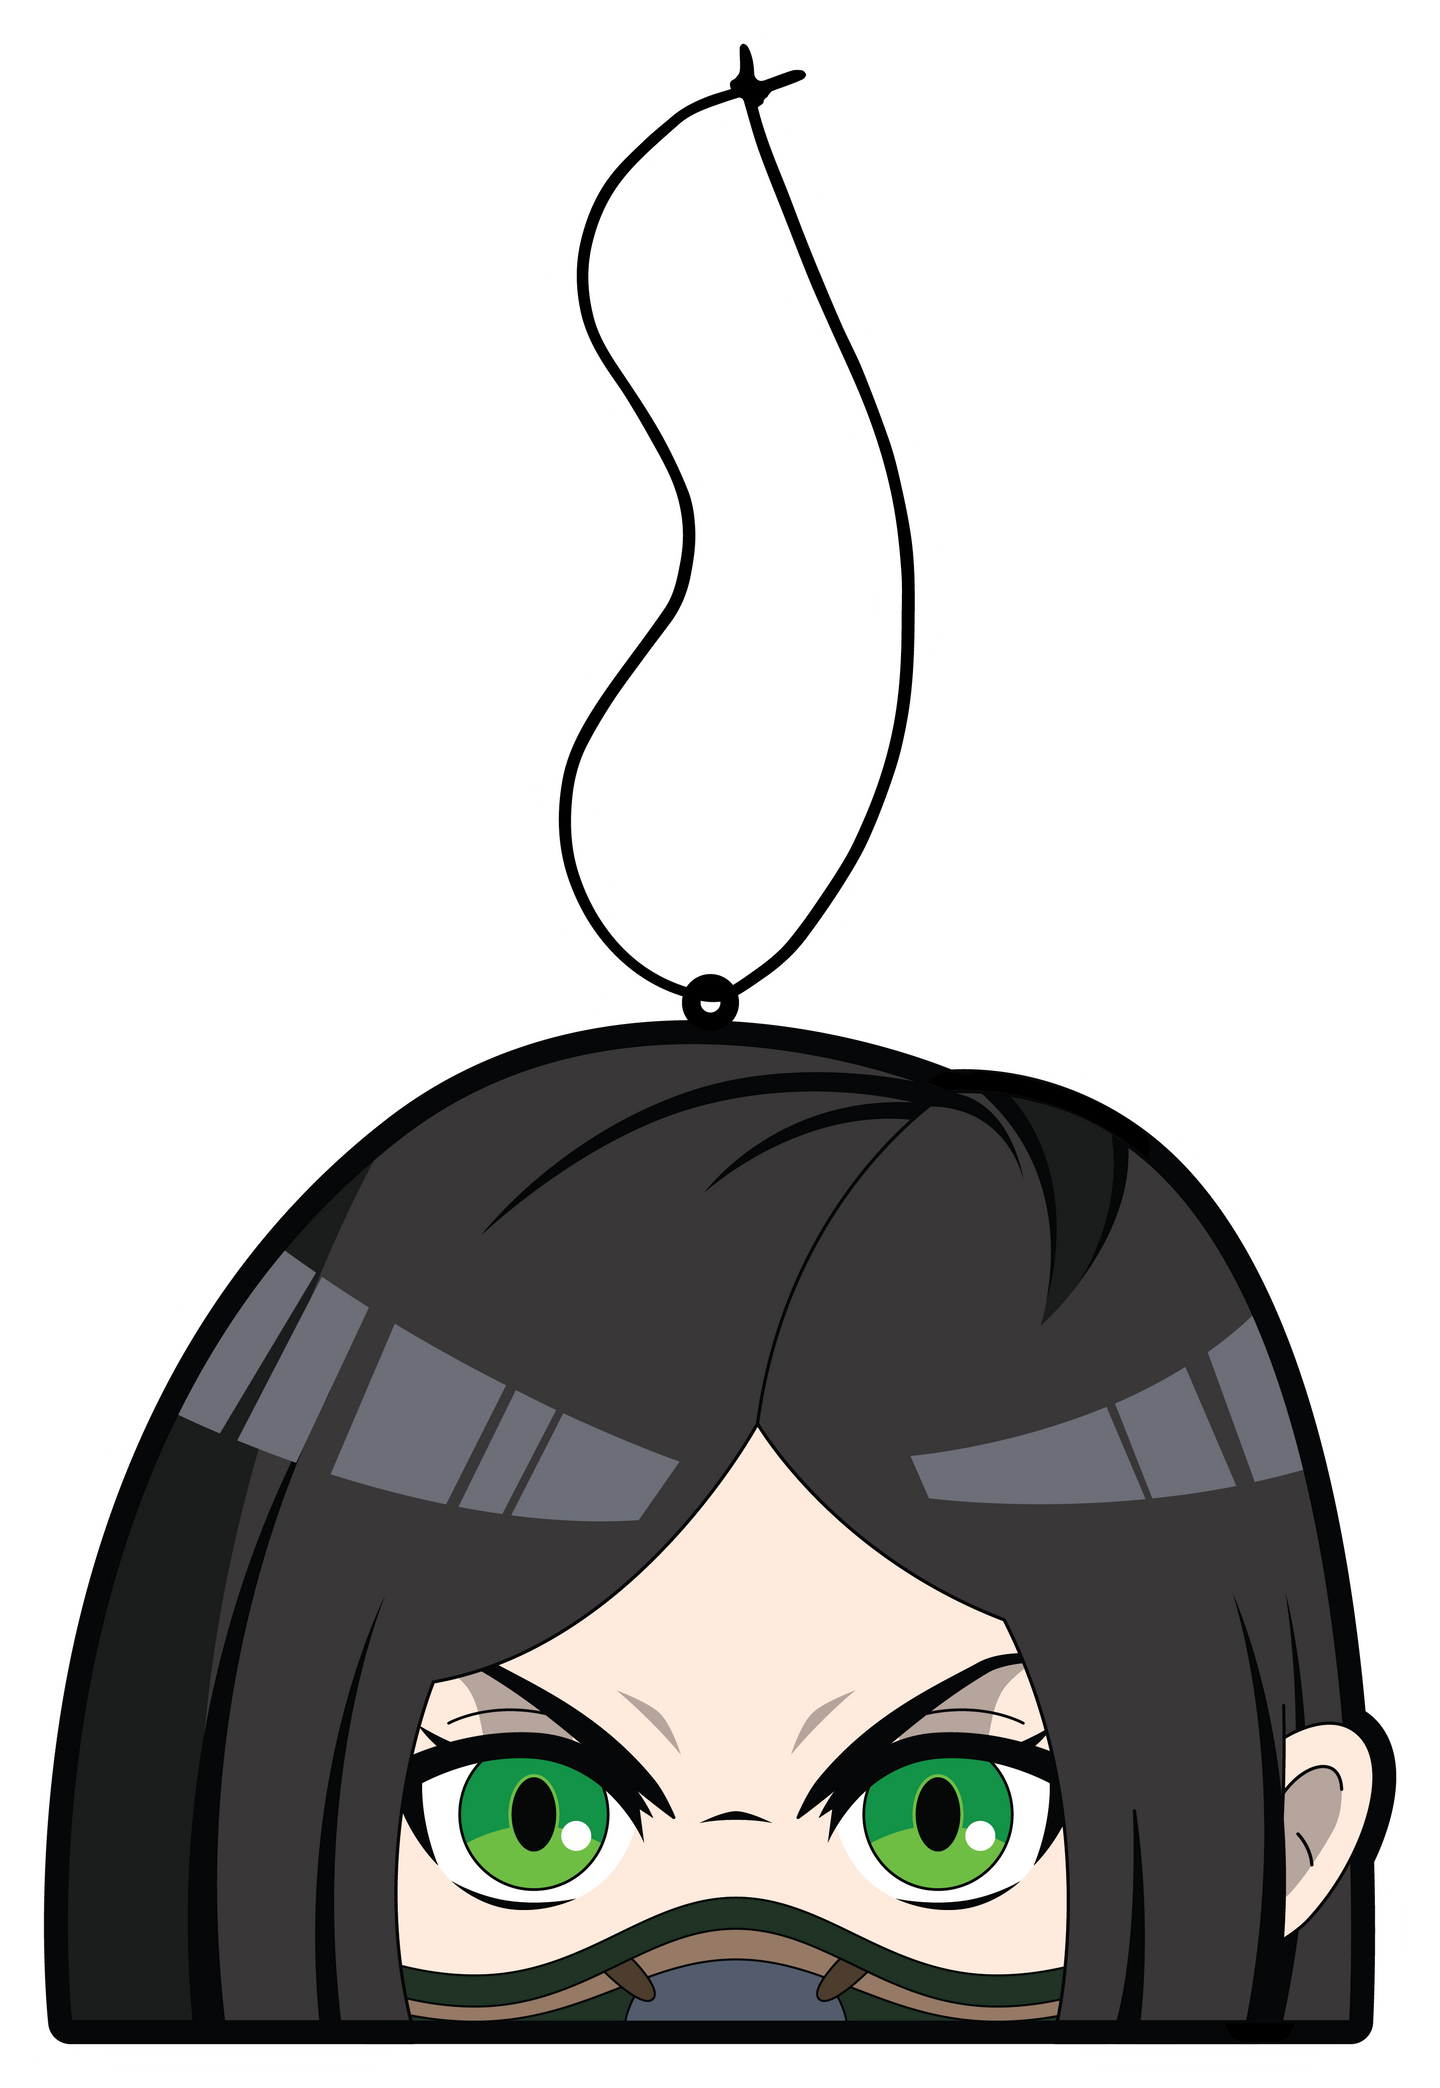 Green Viper air freshener hanging from black string. Japanese anime character with black straight hair and green eyes with toxin mask on.